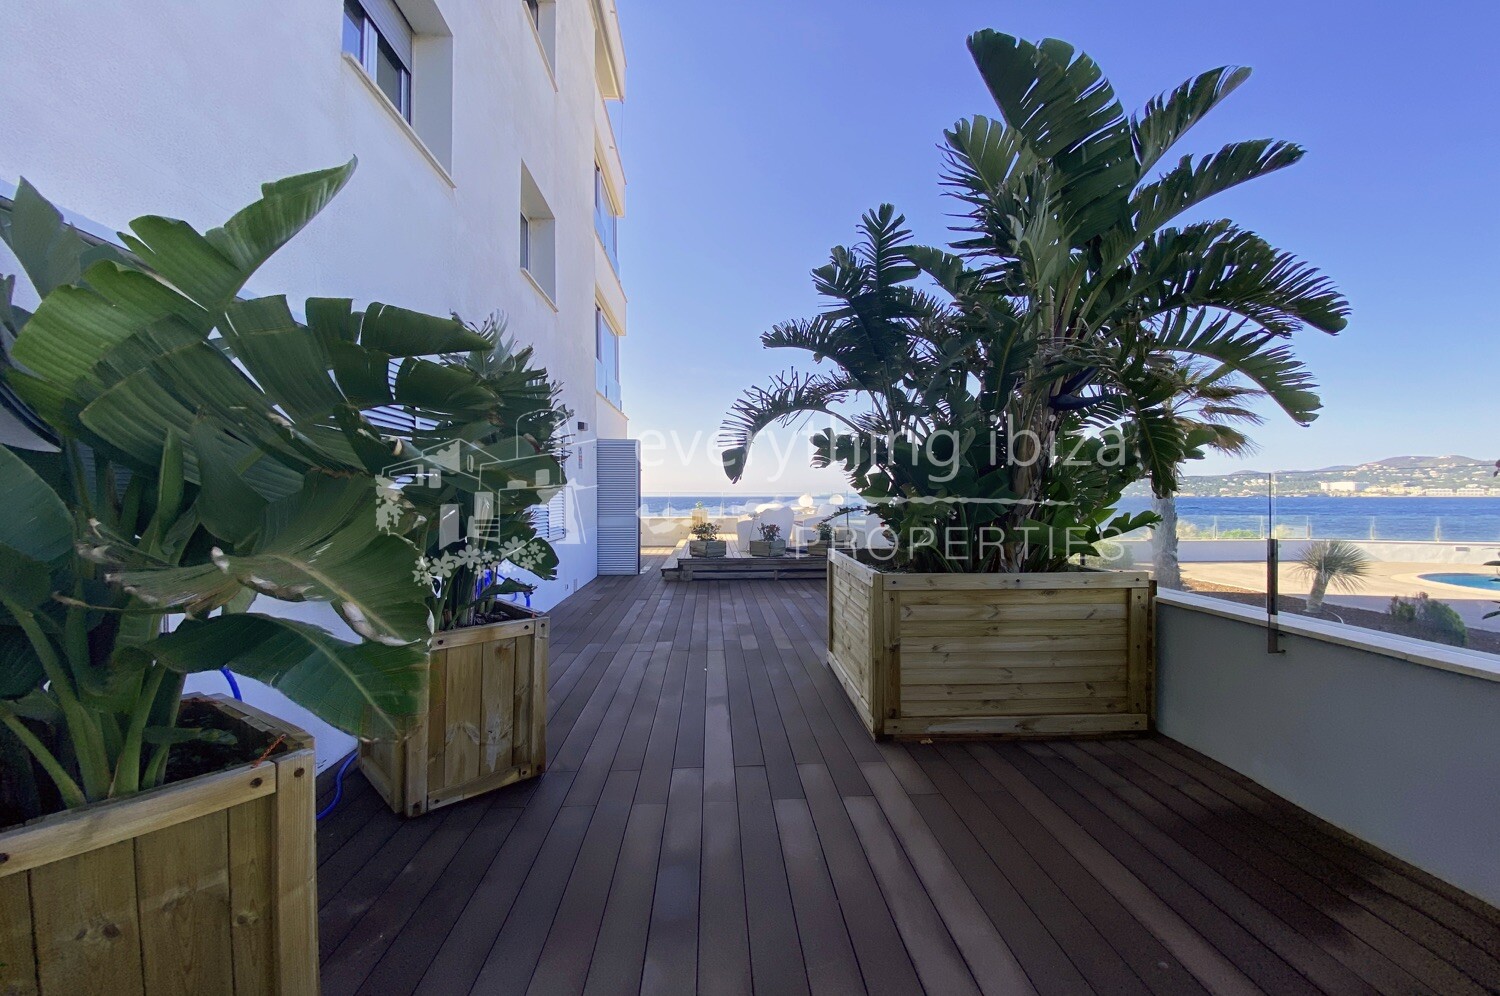 Chic Modern Apartment on the Ibiza Coastline, ref. 1445, for sale in Ibiza by everything ibiza Properties